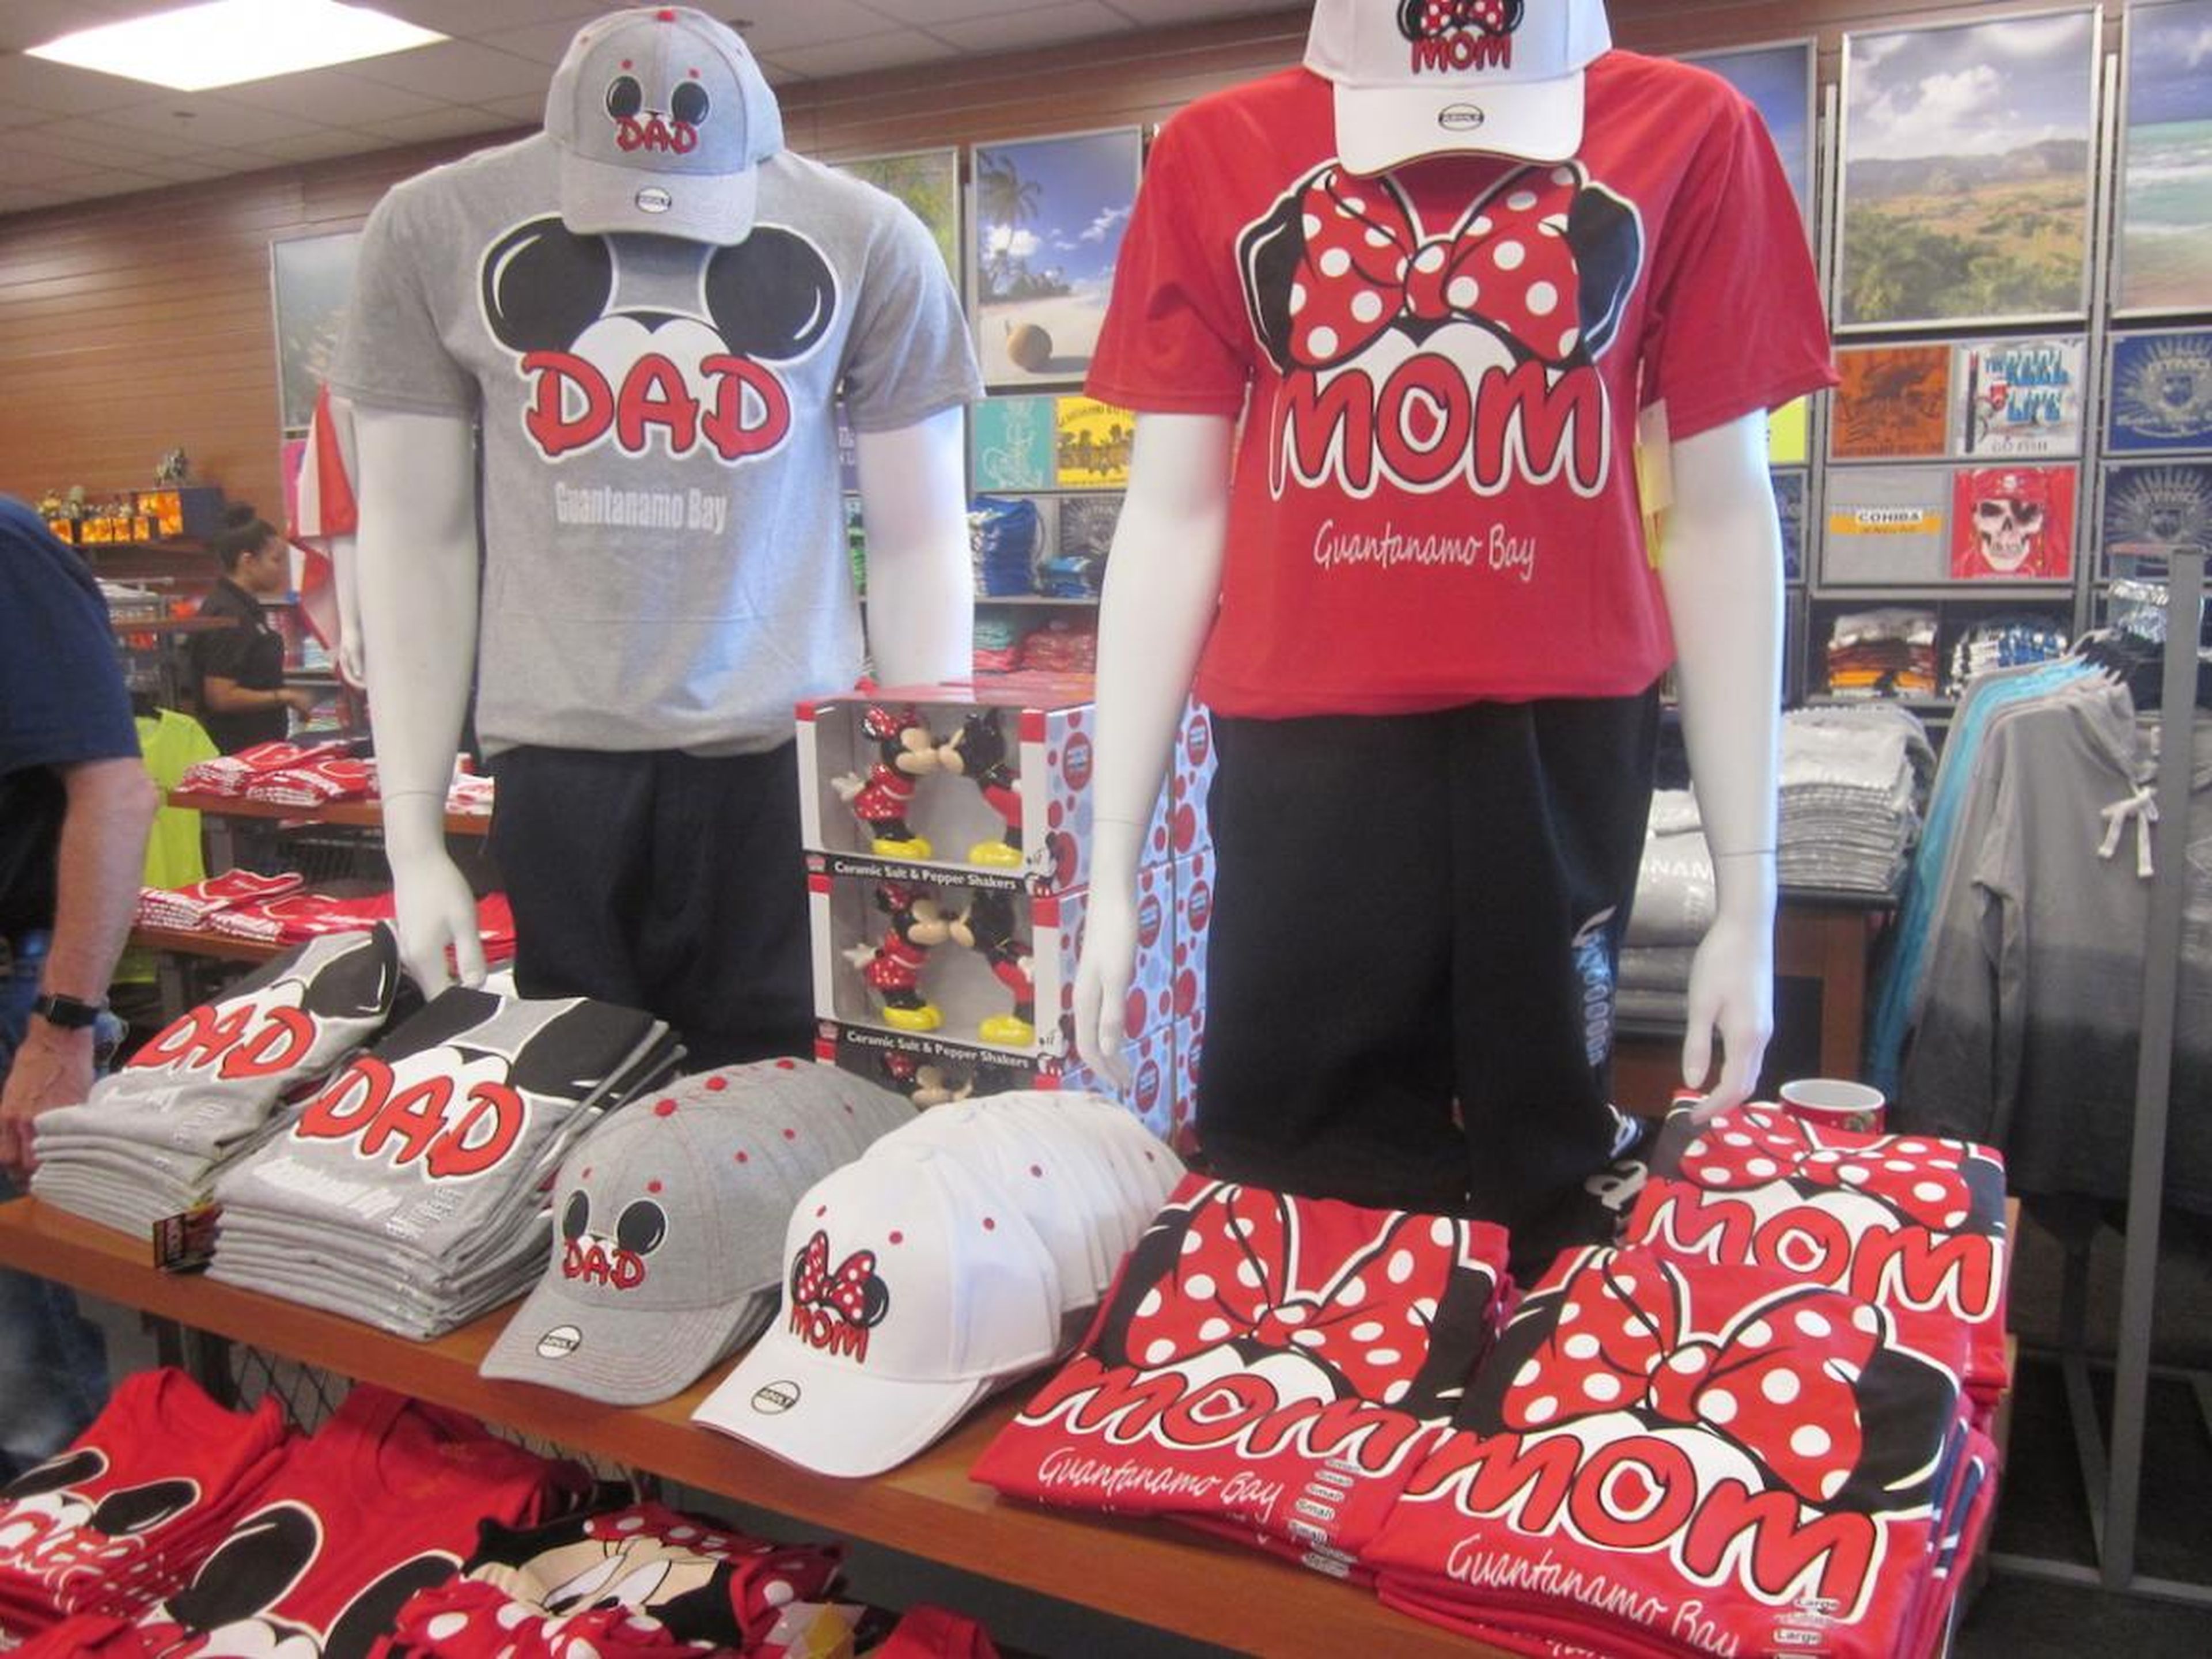 The shop also sells caps and T-shirts of Mickey and Minnie Mouse ears with the words "Dad" and Mom" on them, with — of course — "Guantanamo Bay" underneath.